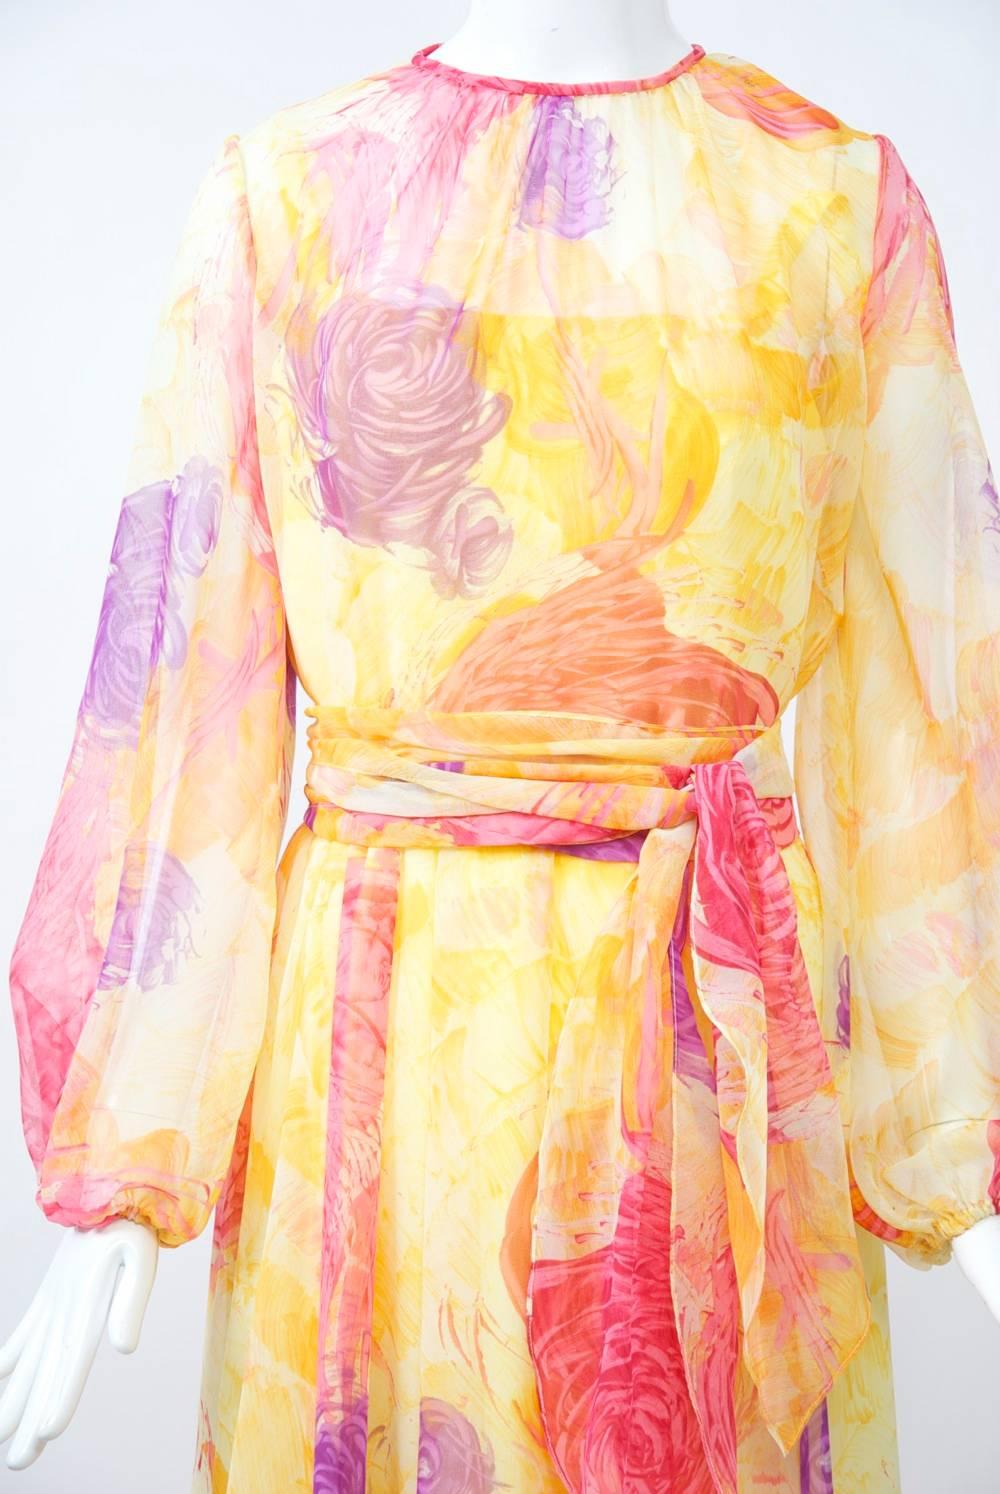 Sheer print gown by Robert Courtney of yellow background with impressionistic watercolor flowers in purple, red, yellow, orange. Style features shirred jewel neckline, long balloon sleeves, and a softly falling skirt. A large sash is the finishing